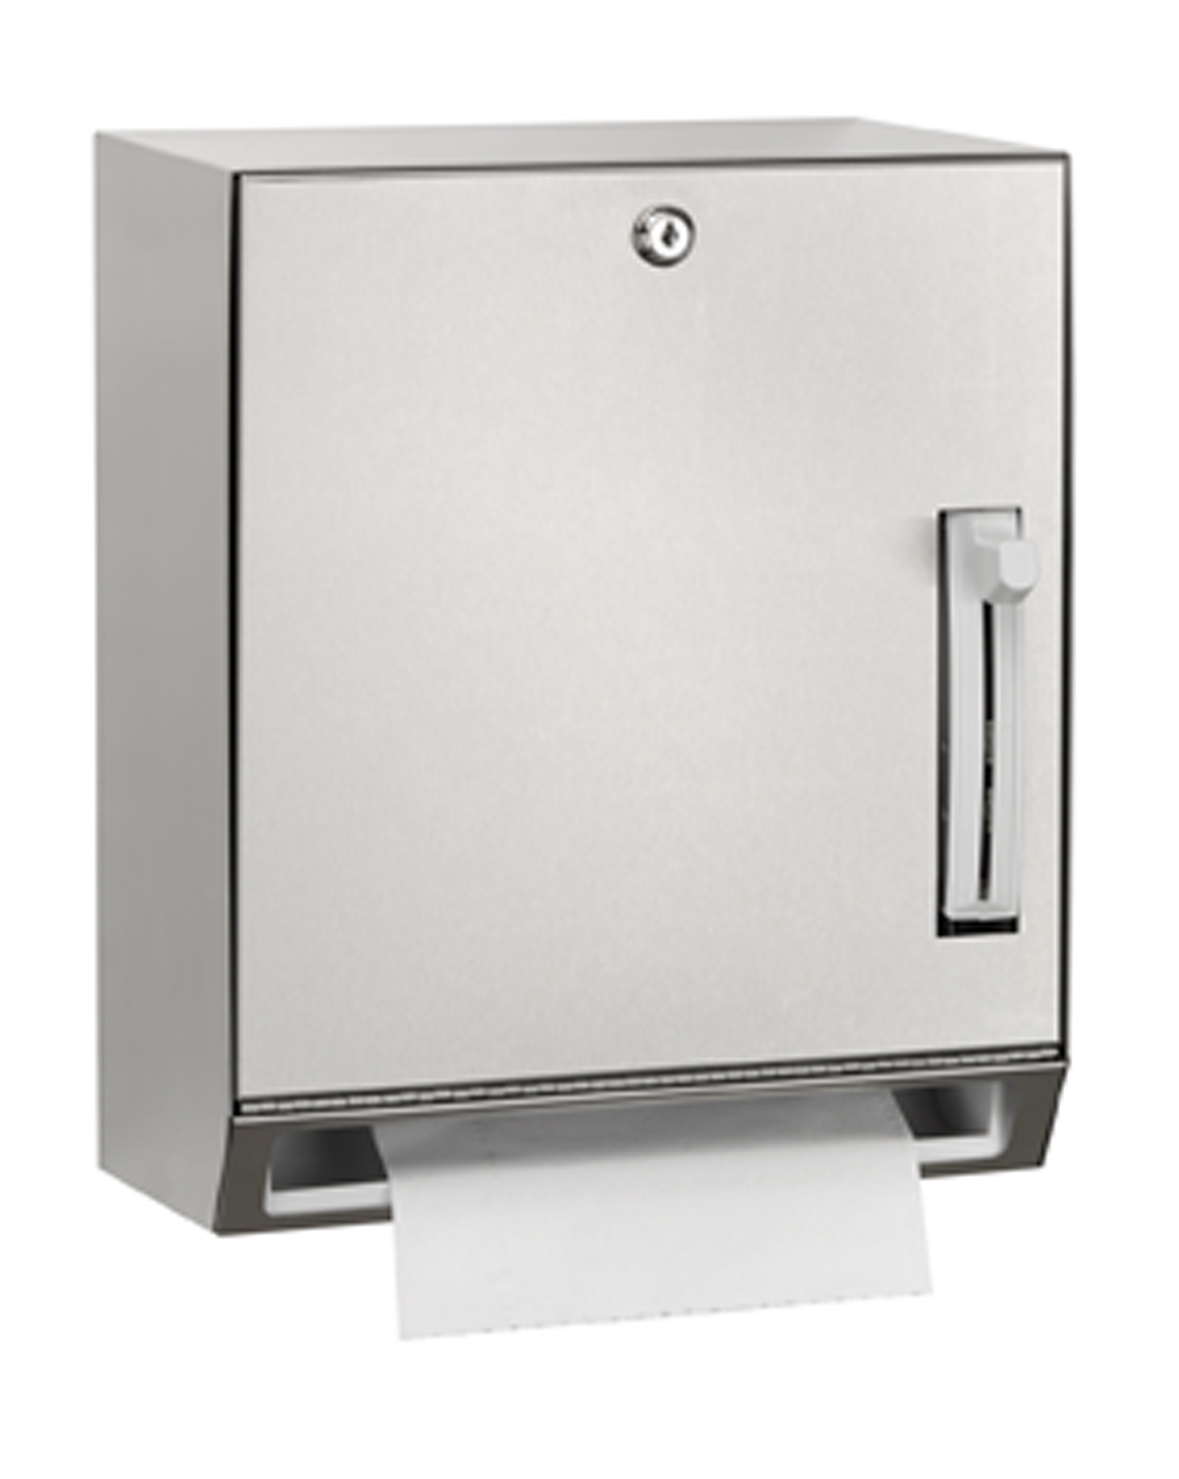 New.  Commercial paper towel dispenser Brushed stainless steel 